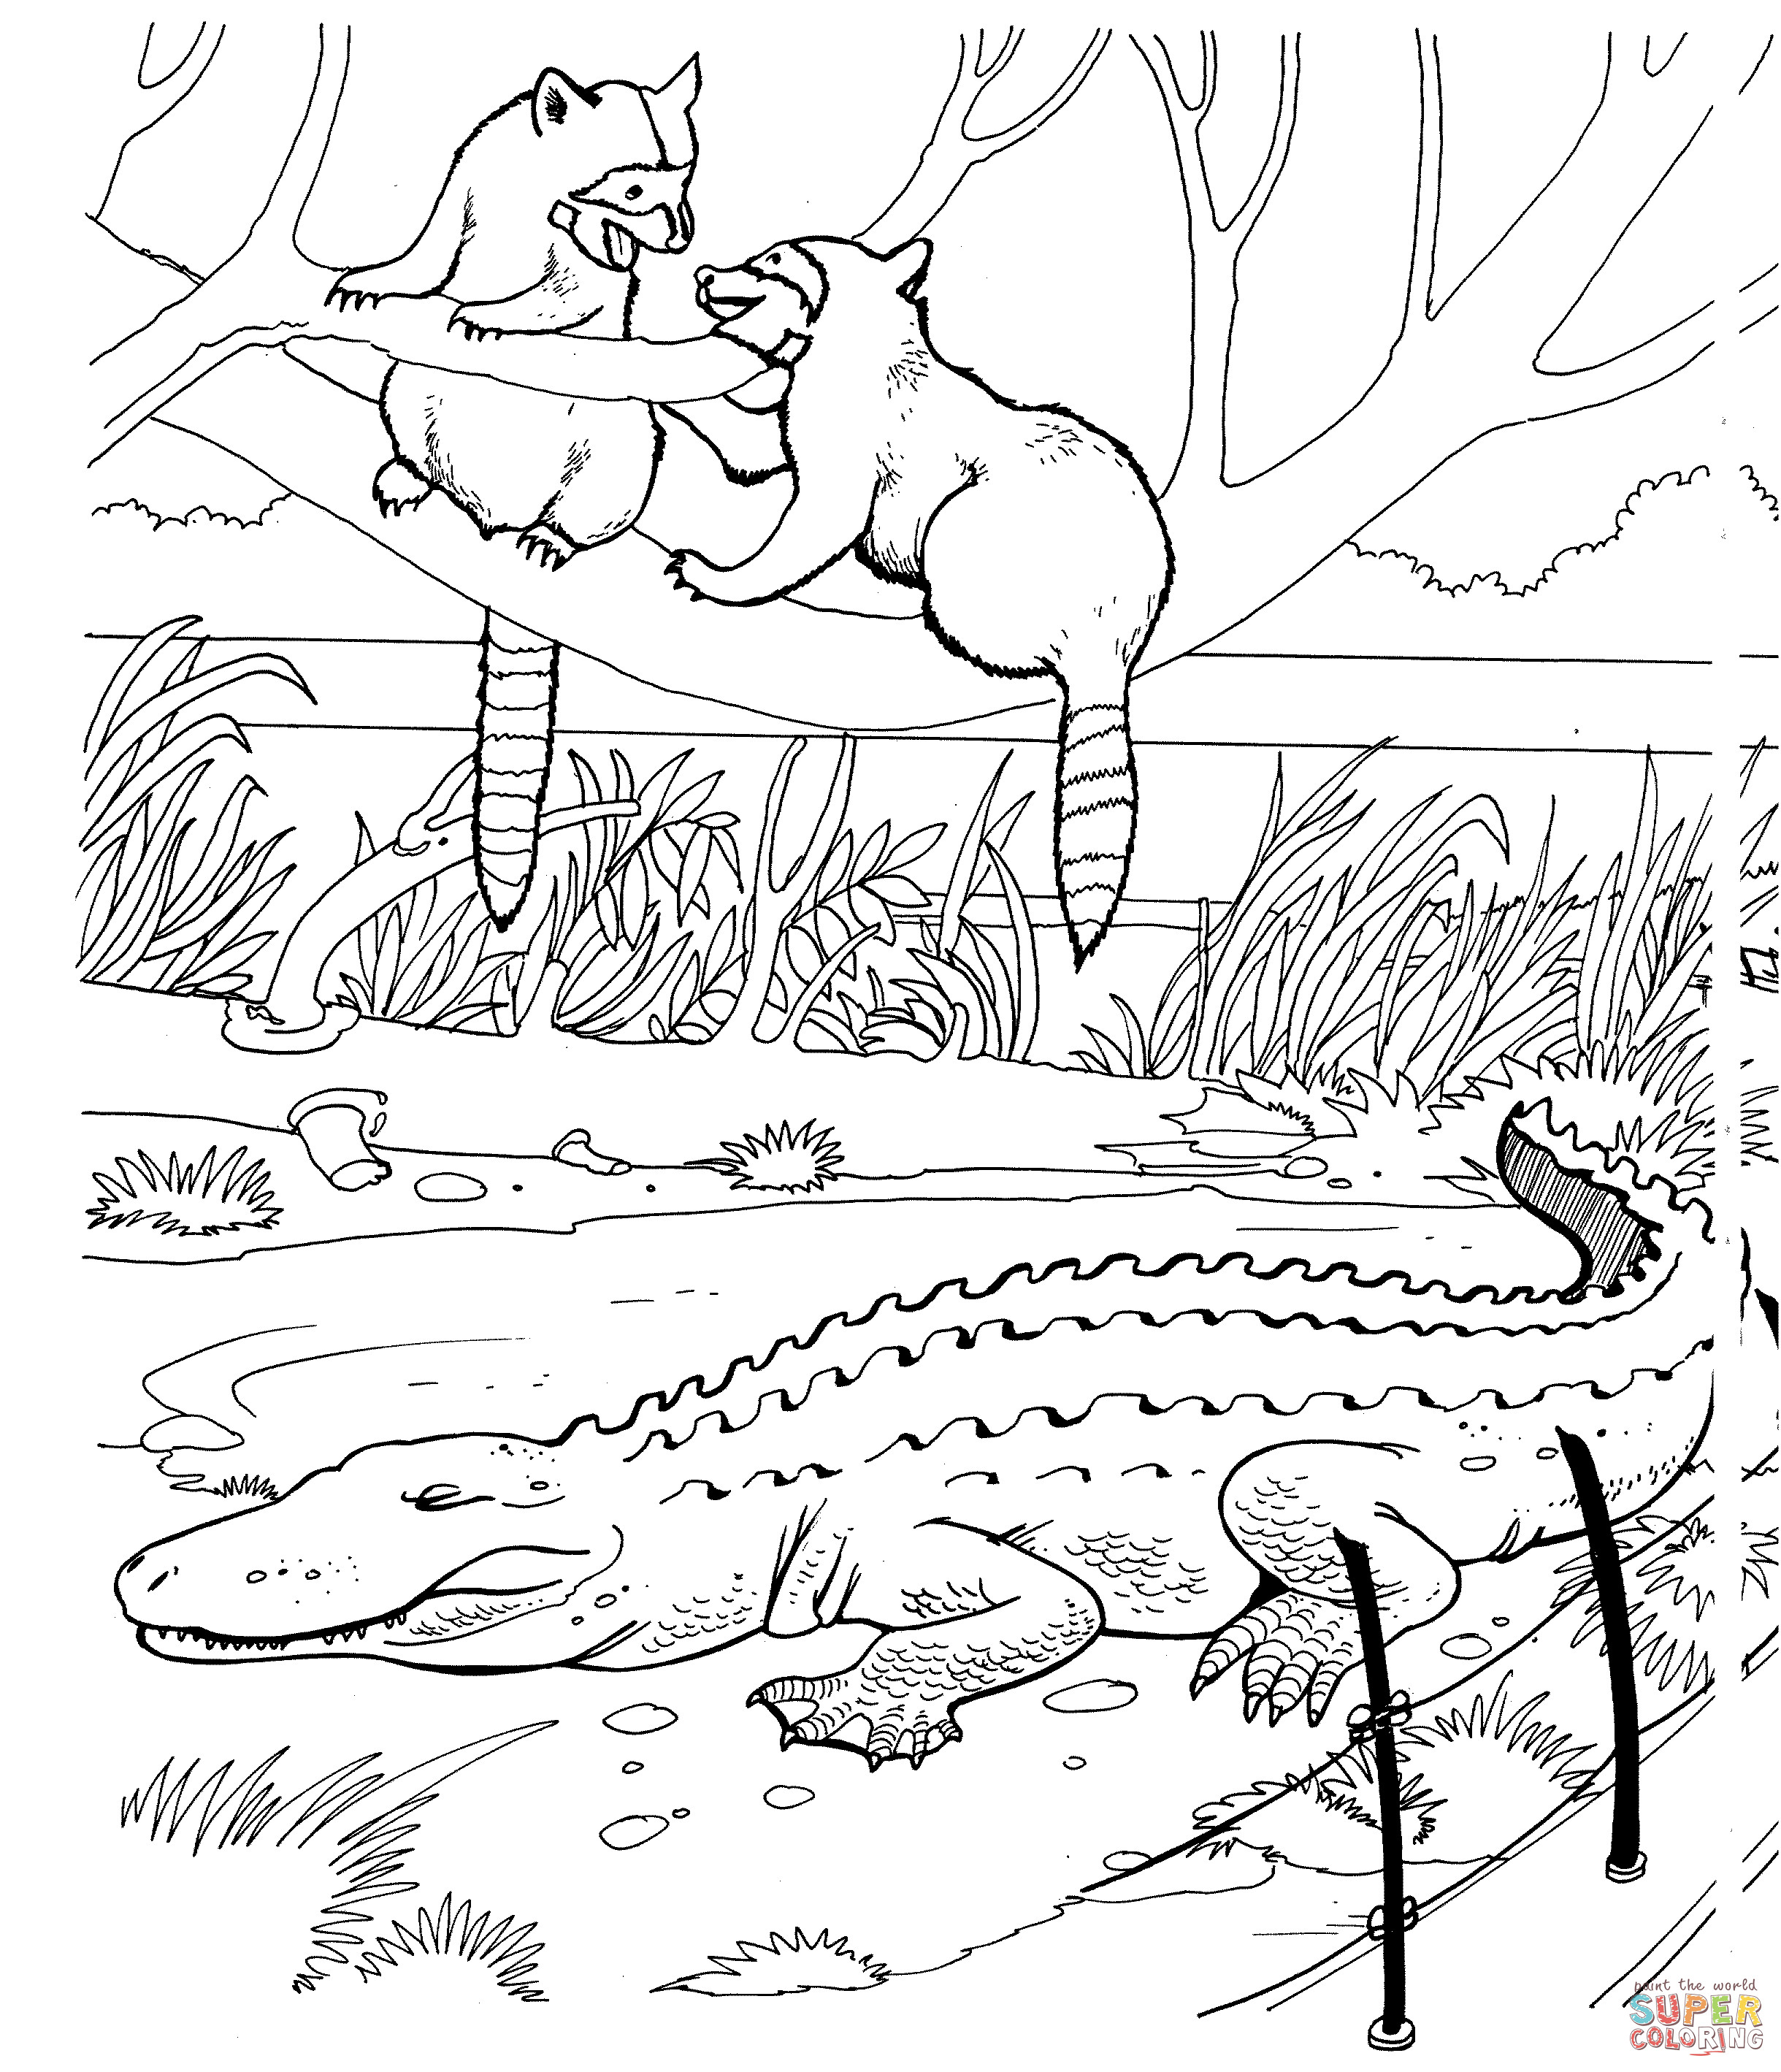 Zoo Animals Coloring Pages
 Two Raccoons and Alligator in a Zoo Coloring page